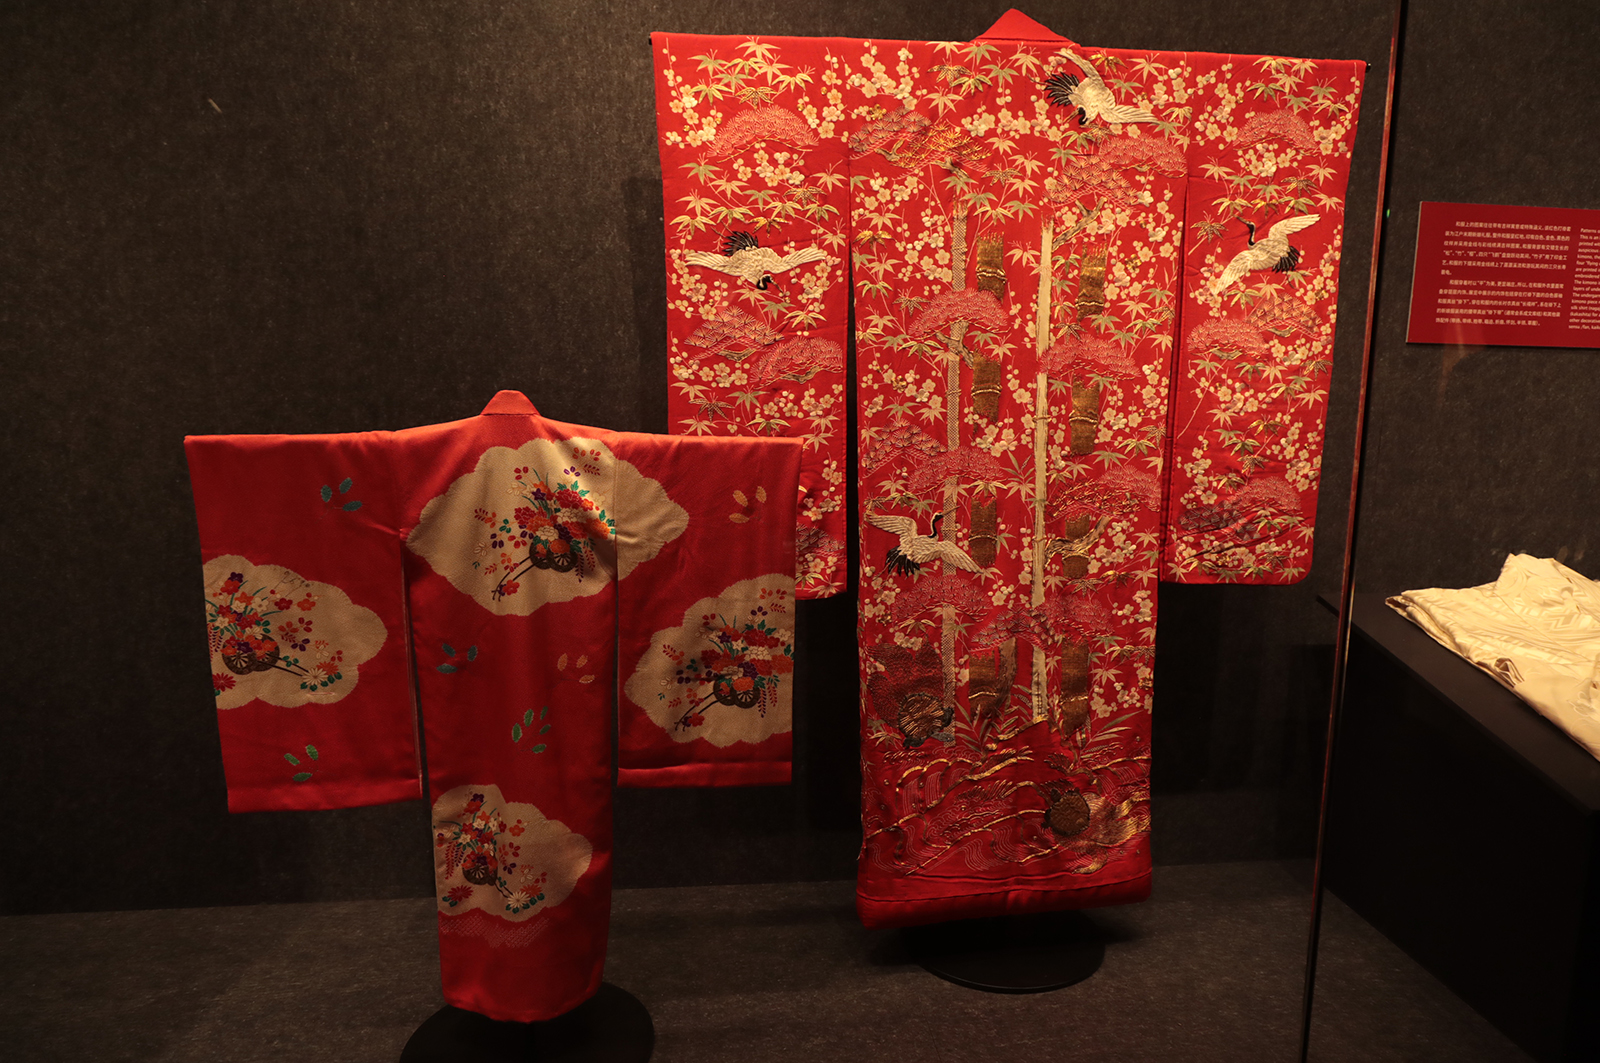 Japanese floral kimonos for girls are on display at the 